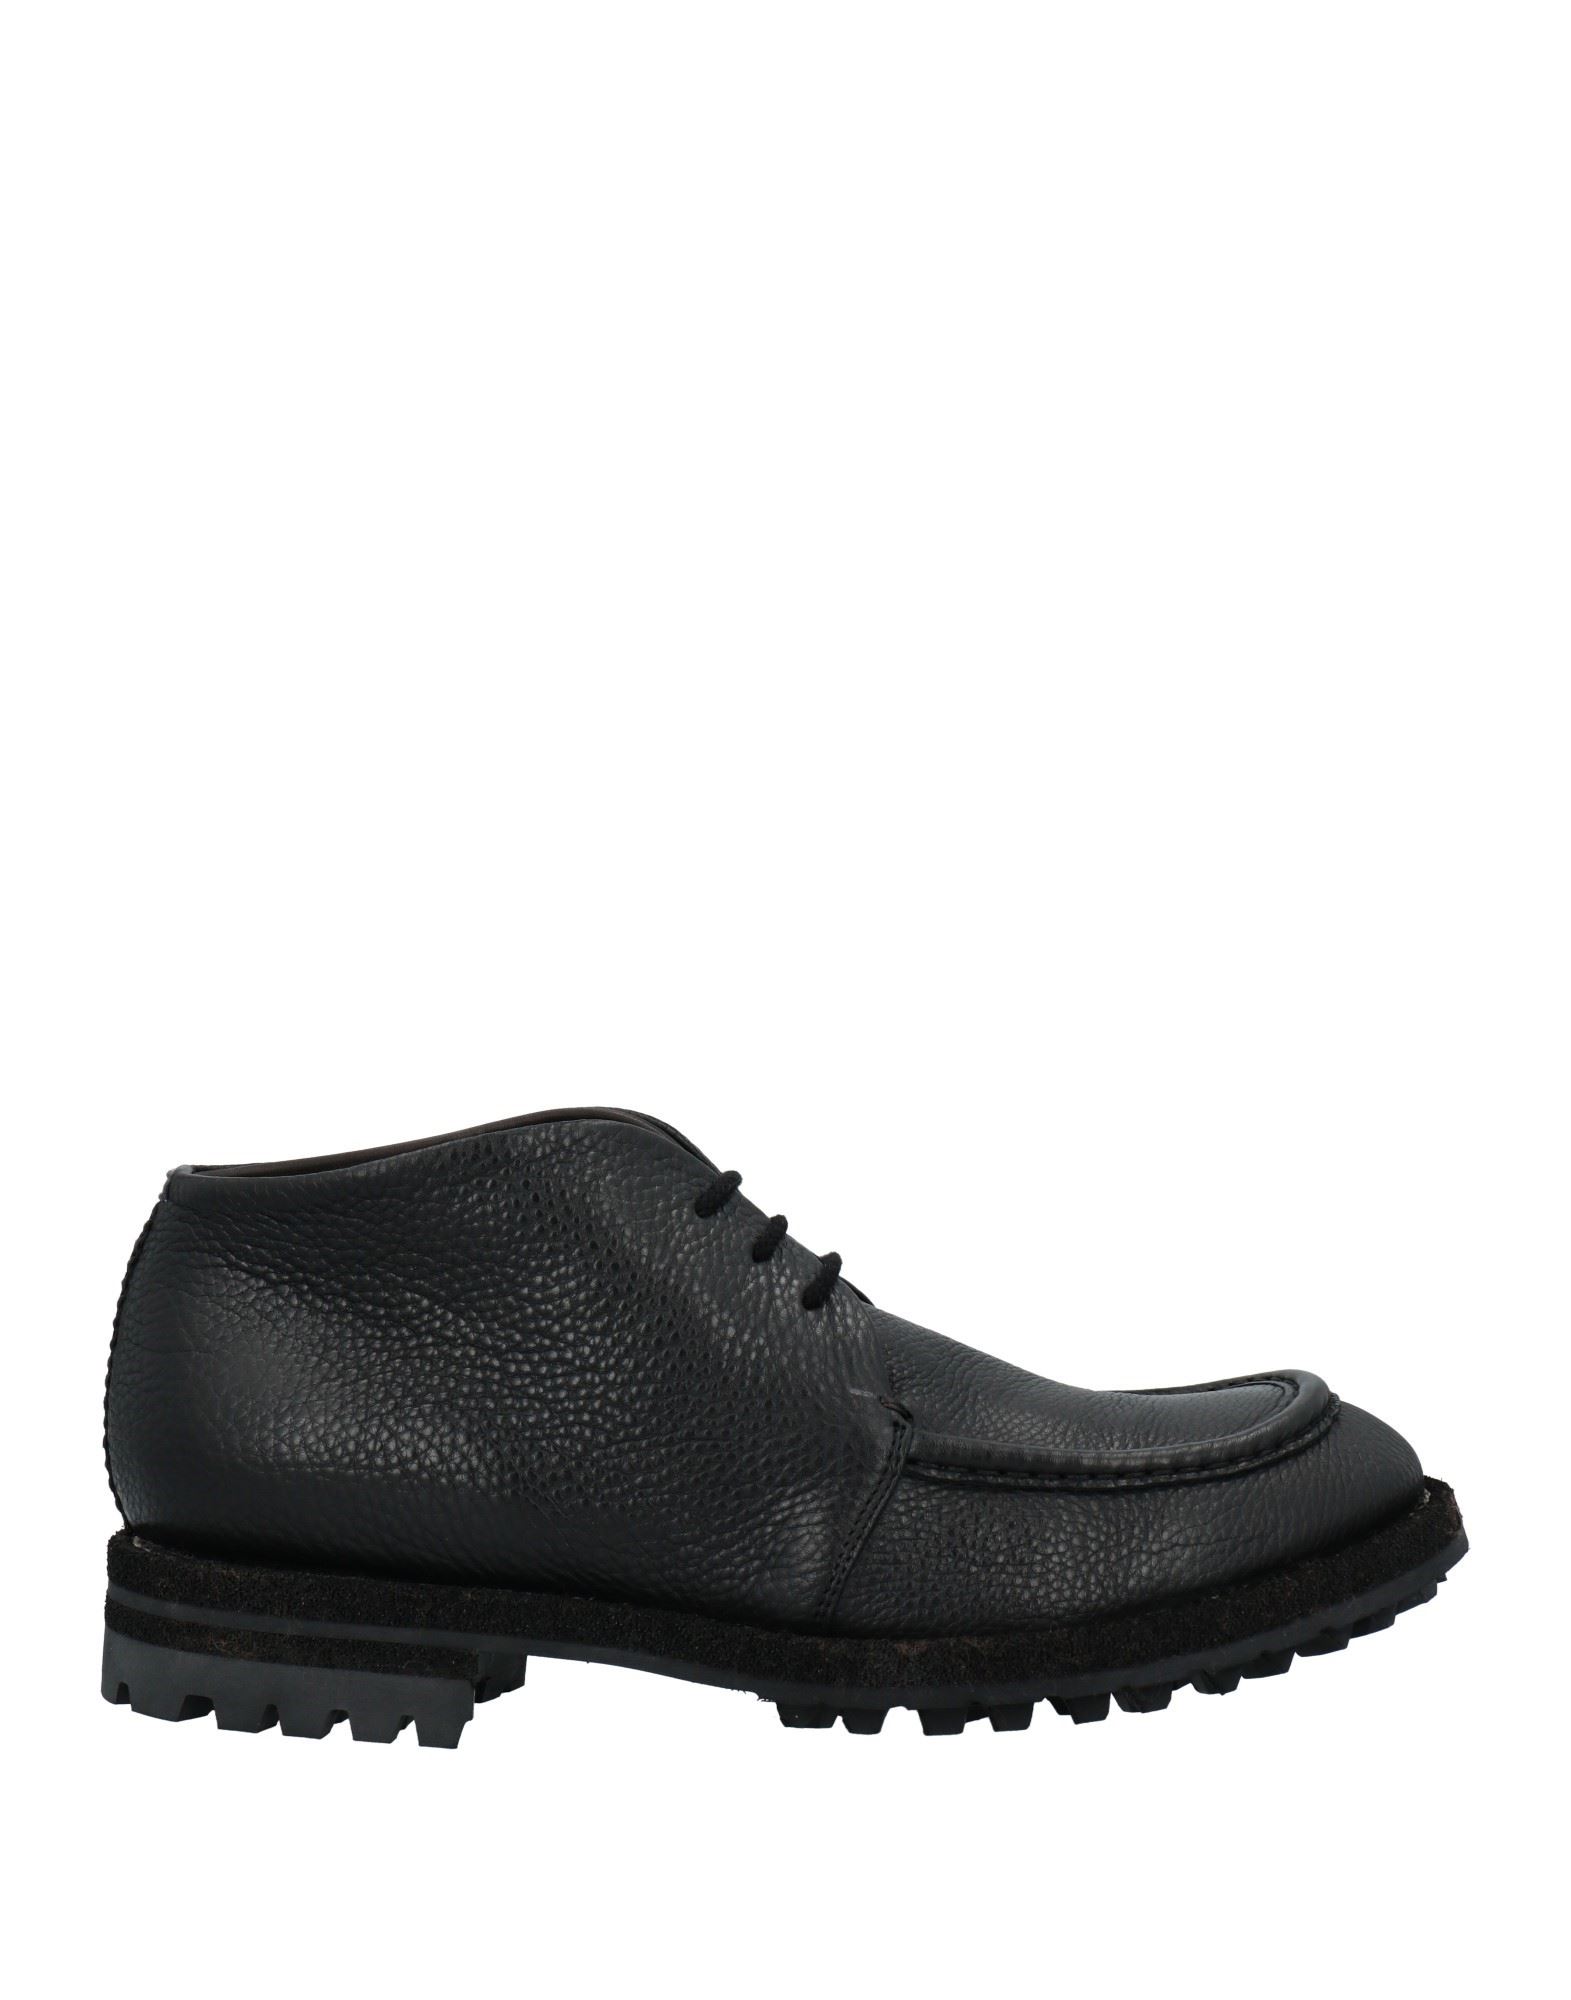 Trofeo By Stefano Branchini Ankle Boots In Black | ModeSens